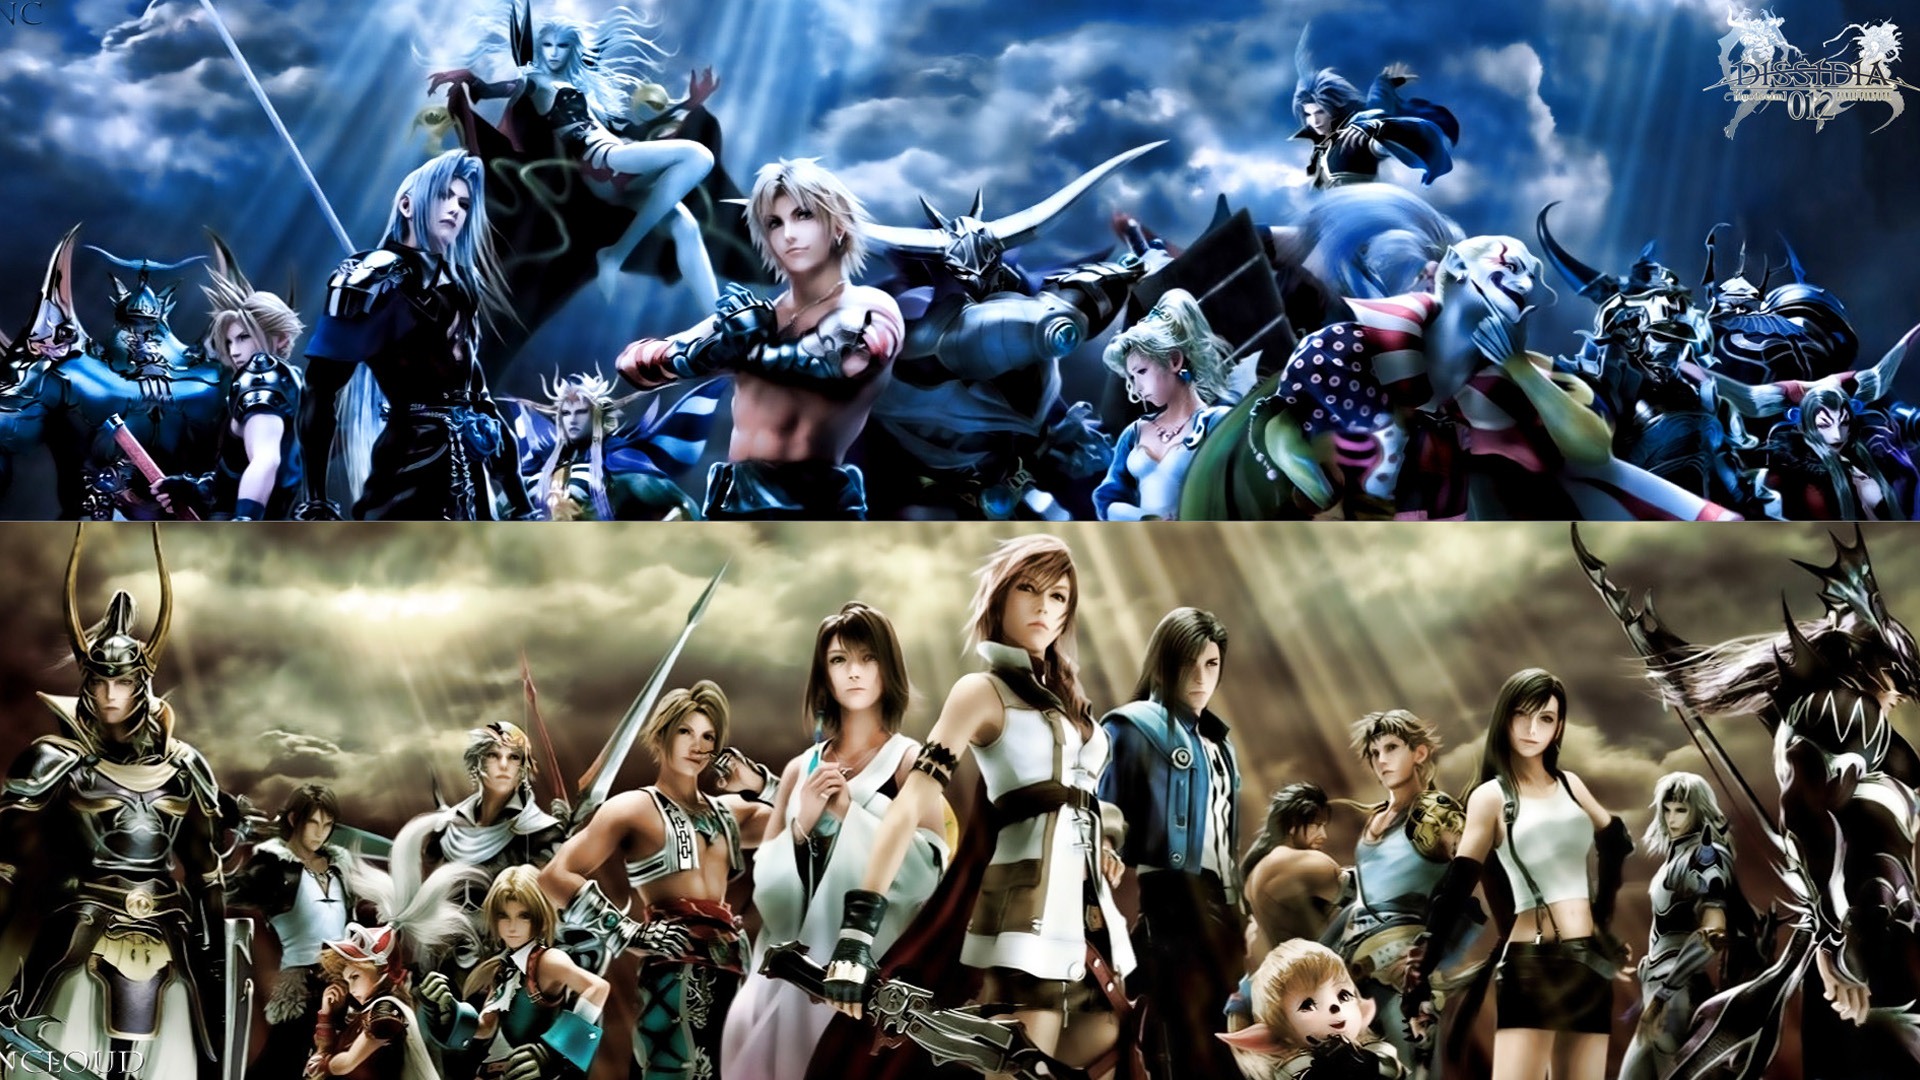 Free Download Final Fantasy Hd Wallpapers 1920x1080 For Your